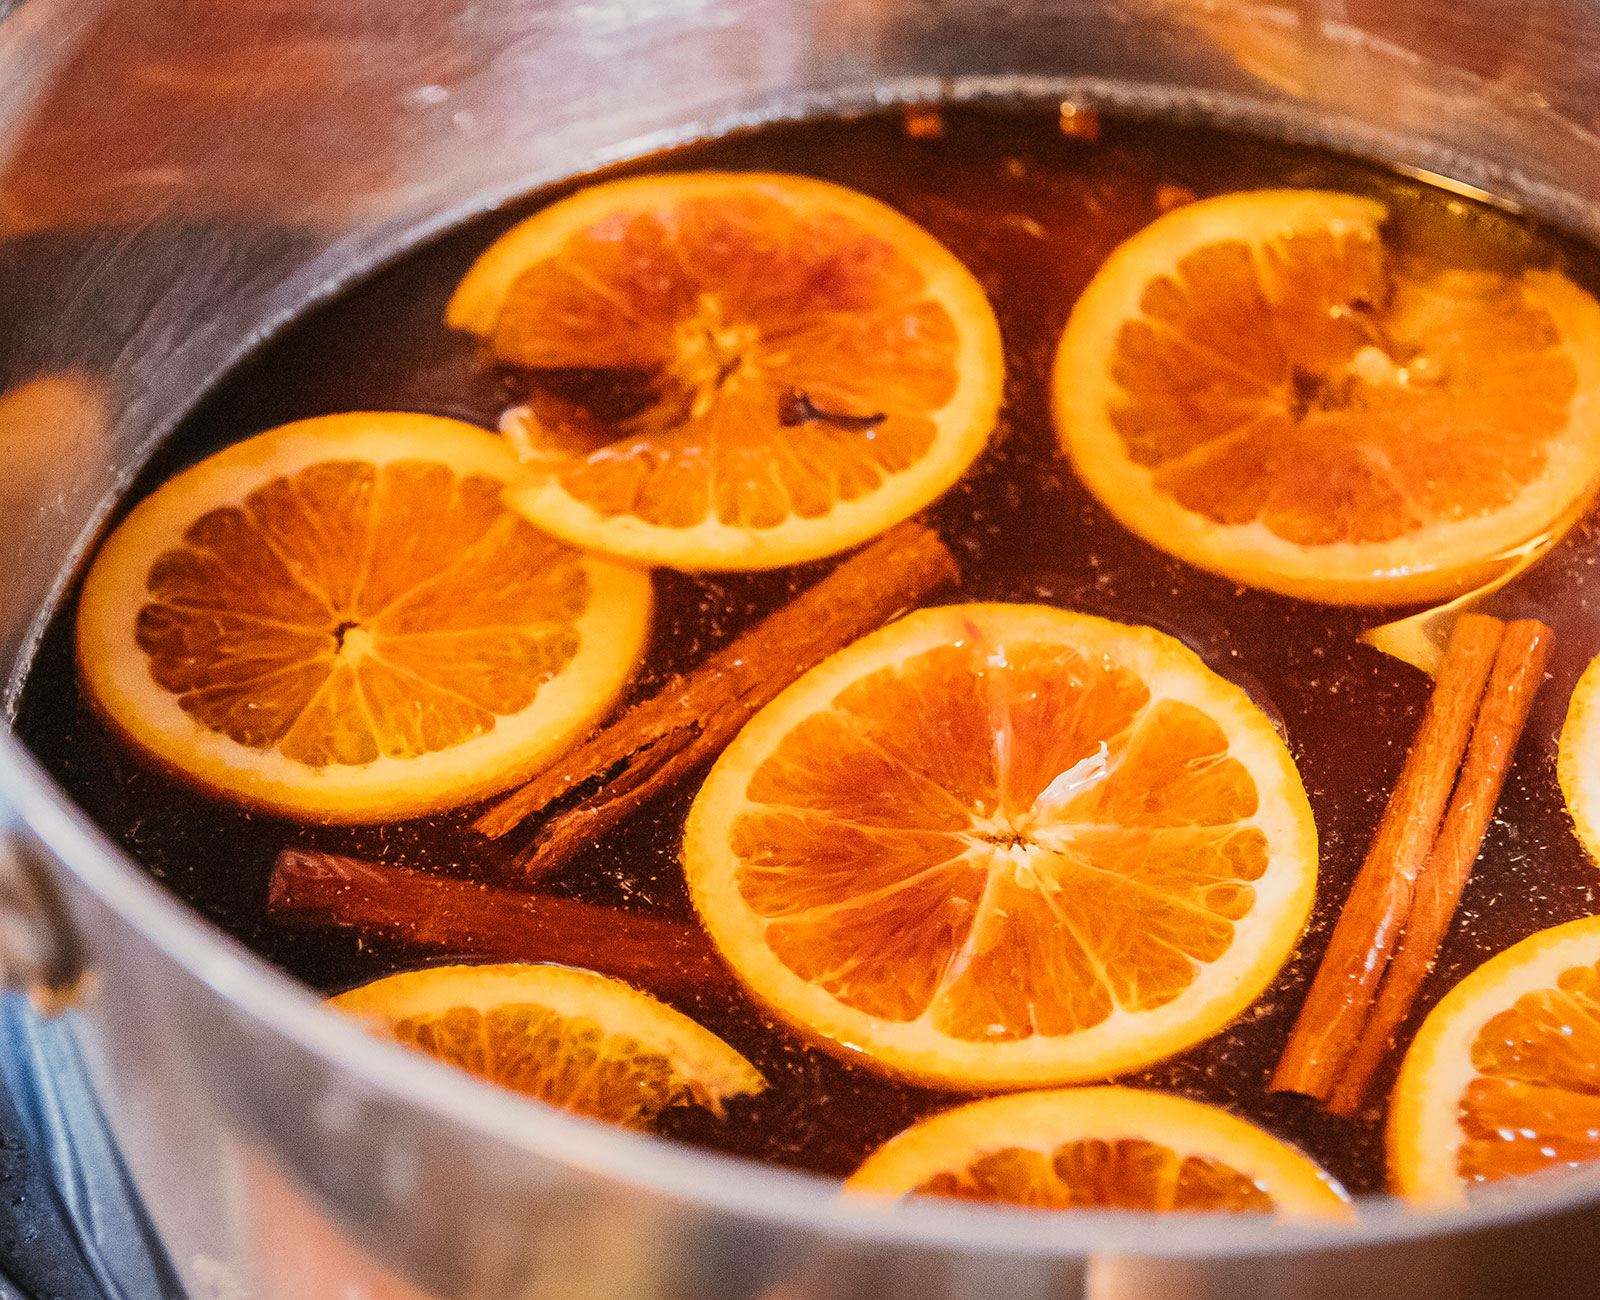 Pot of Mulled Vya with orange slices and cinnamon sticks